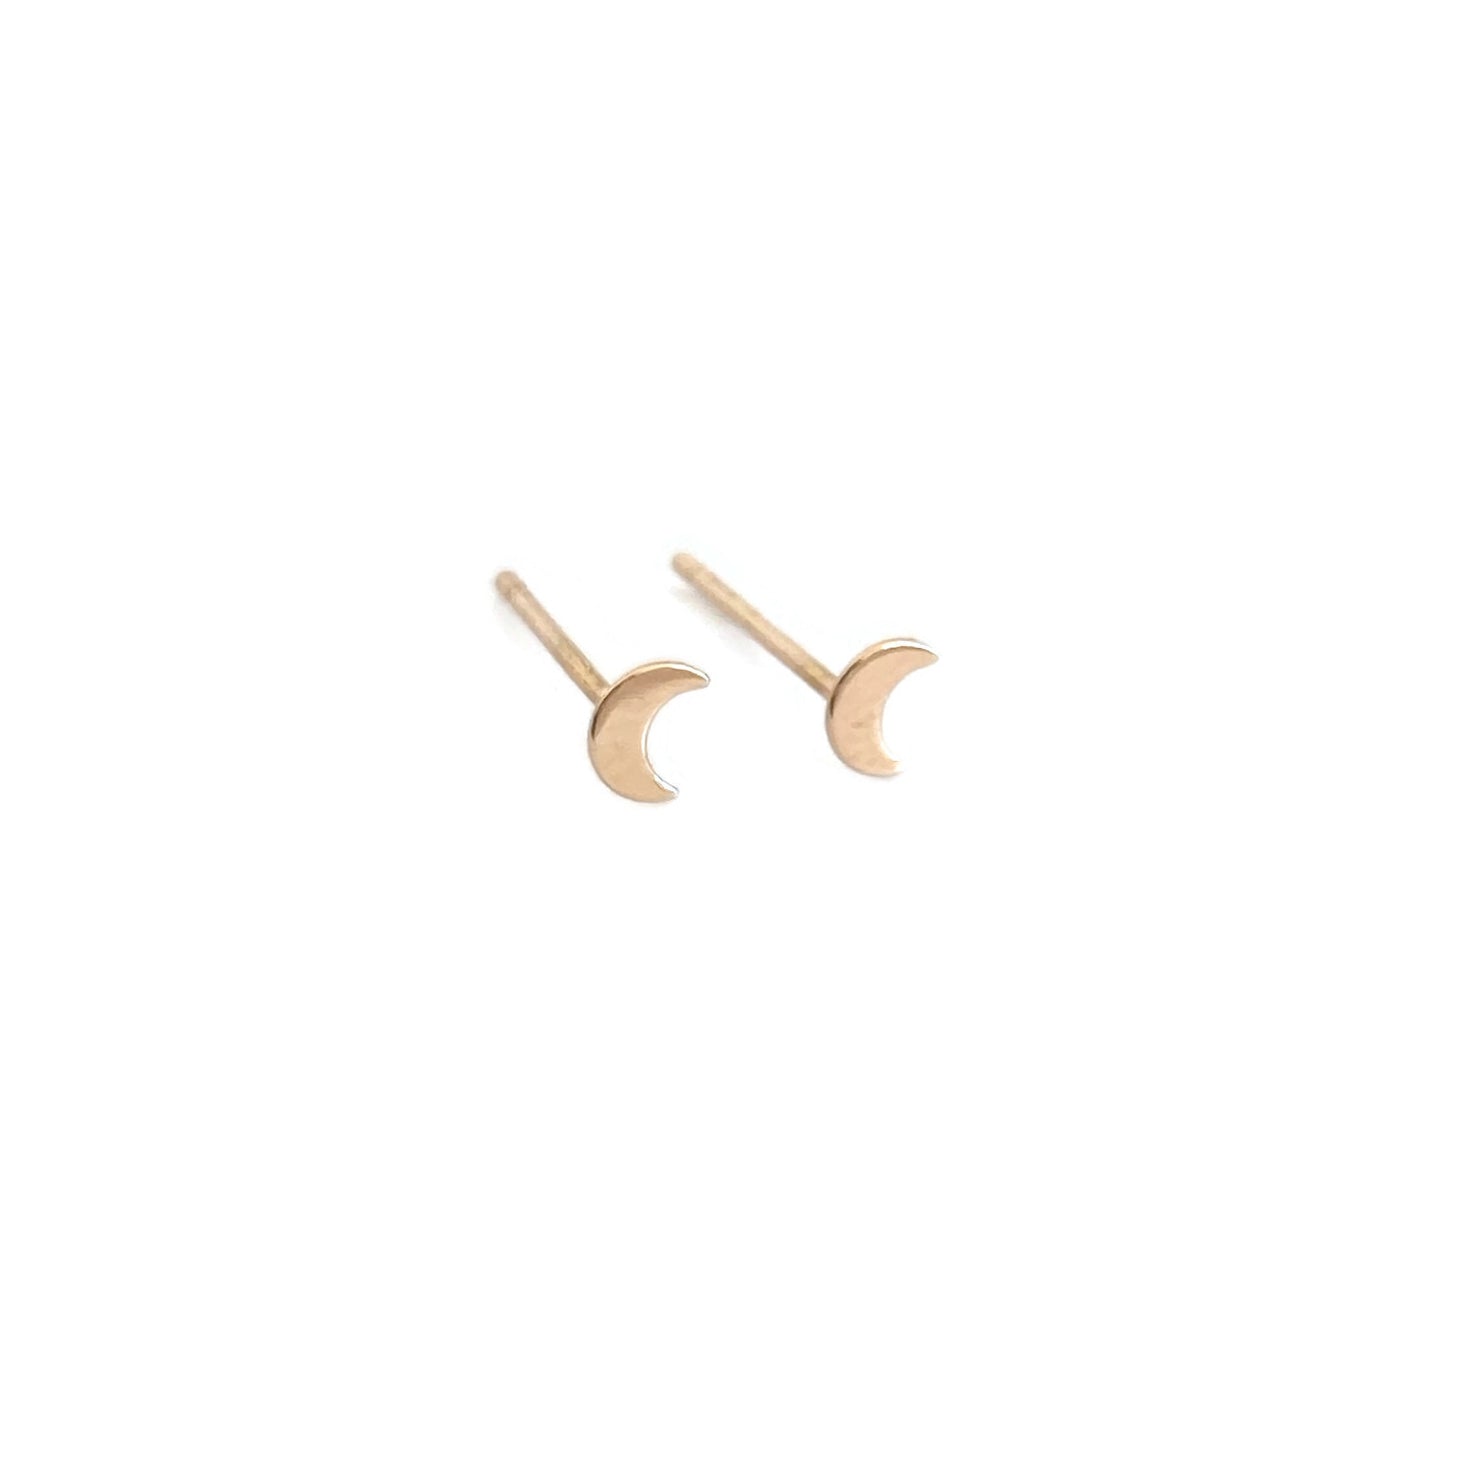 tiny 14k moon stud earrings are made of solid 14k gold with 14k ear posts